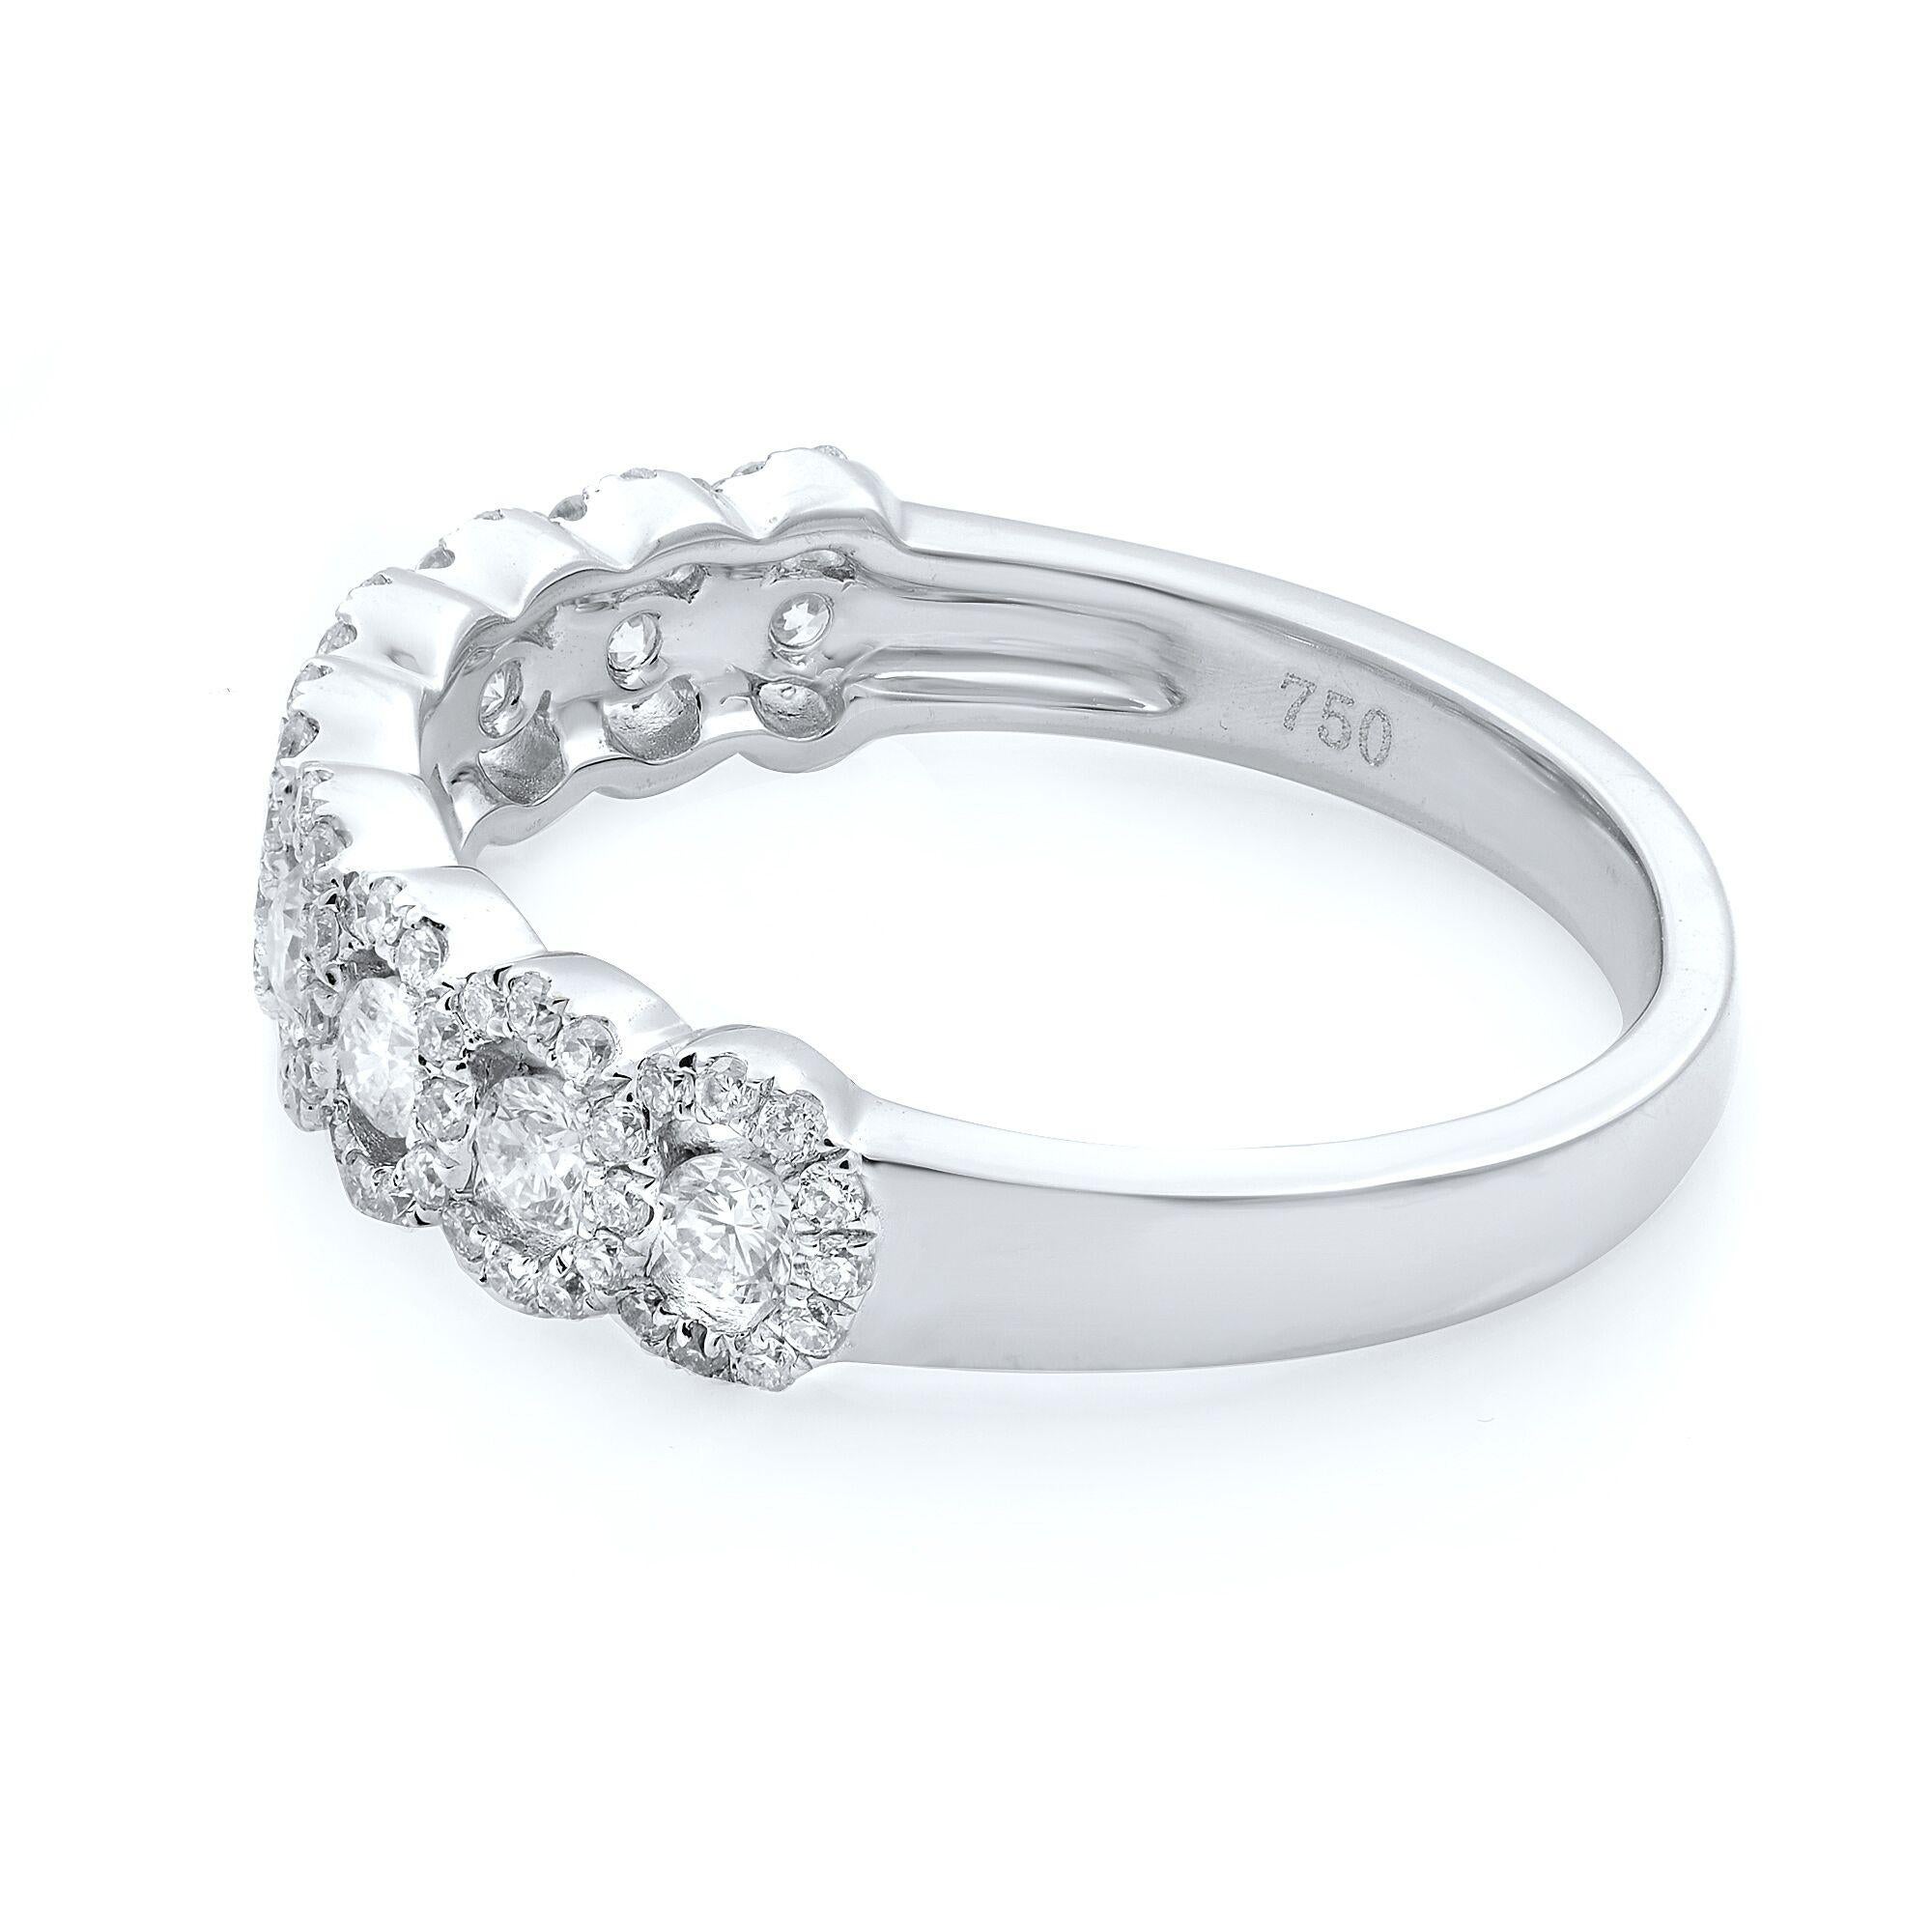 Half-way beautiful eternity round cut diamond halo ring set in 18k white gold. Little tiny diamonds are micro pave set around round cut diamonds. Total carat weight: approx. 0.70. Ring Size: 6.75. Comes in our presentation box. 